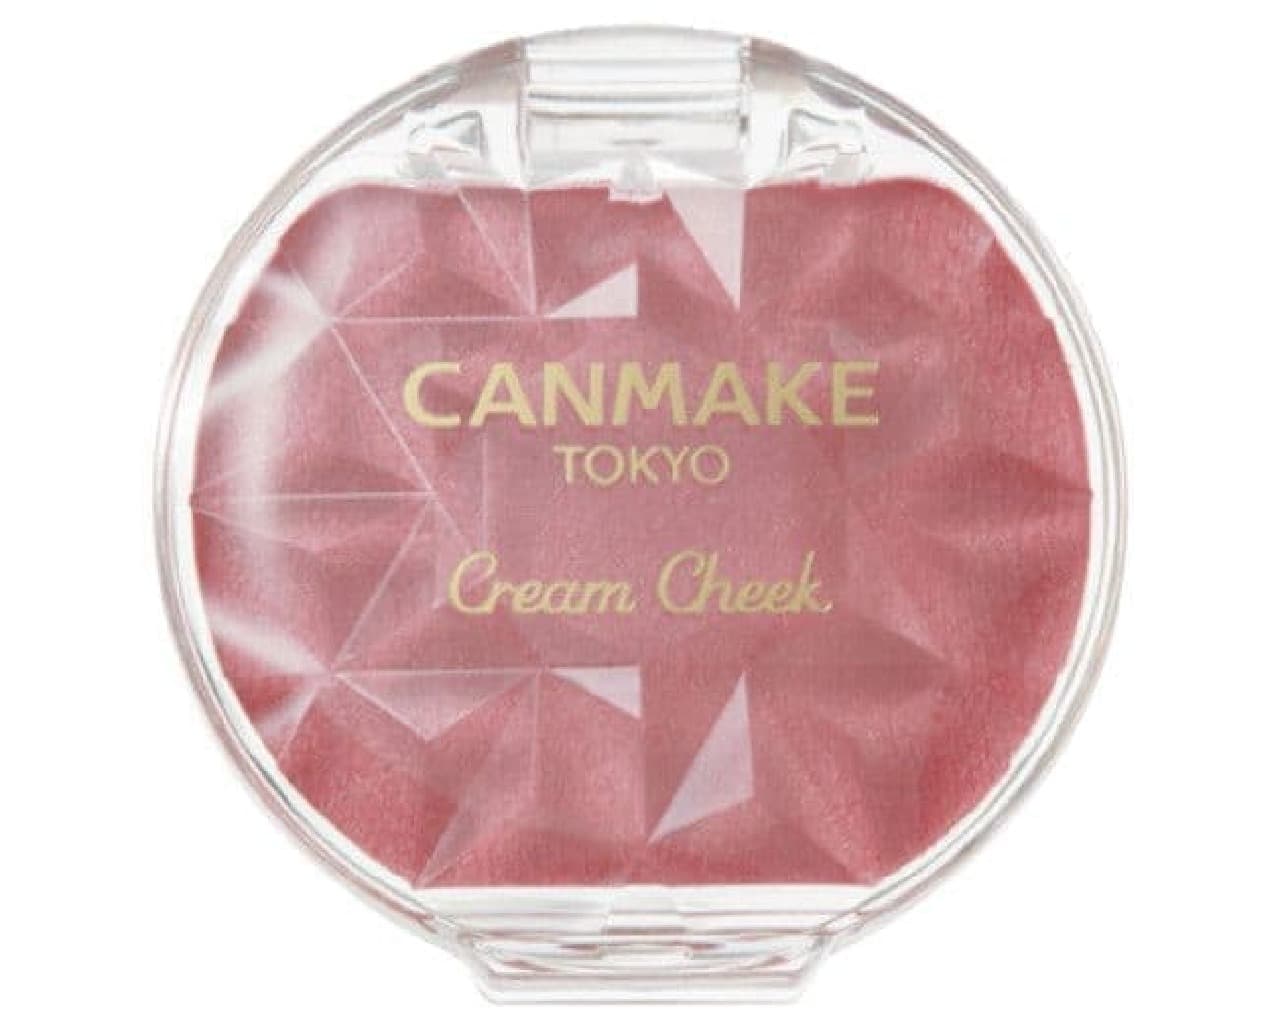 "P02 Rose Petal" from Canmake "Cream Cheek (Pearl Type)"